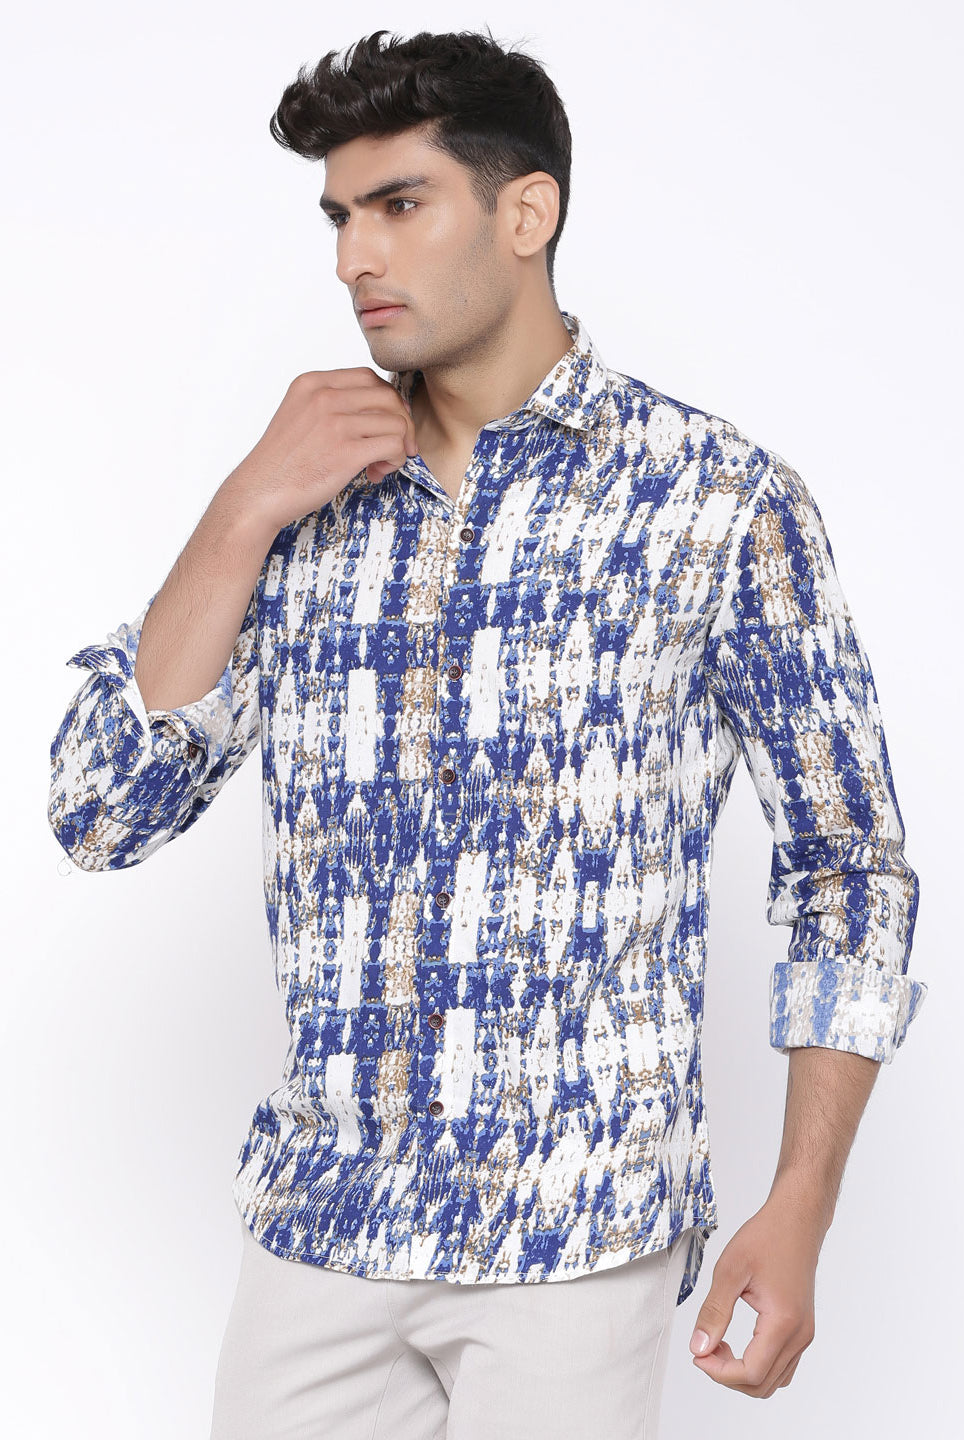 abstract printed shirts online